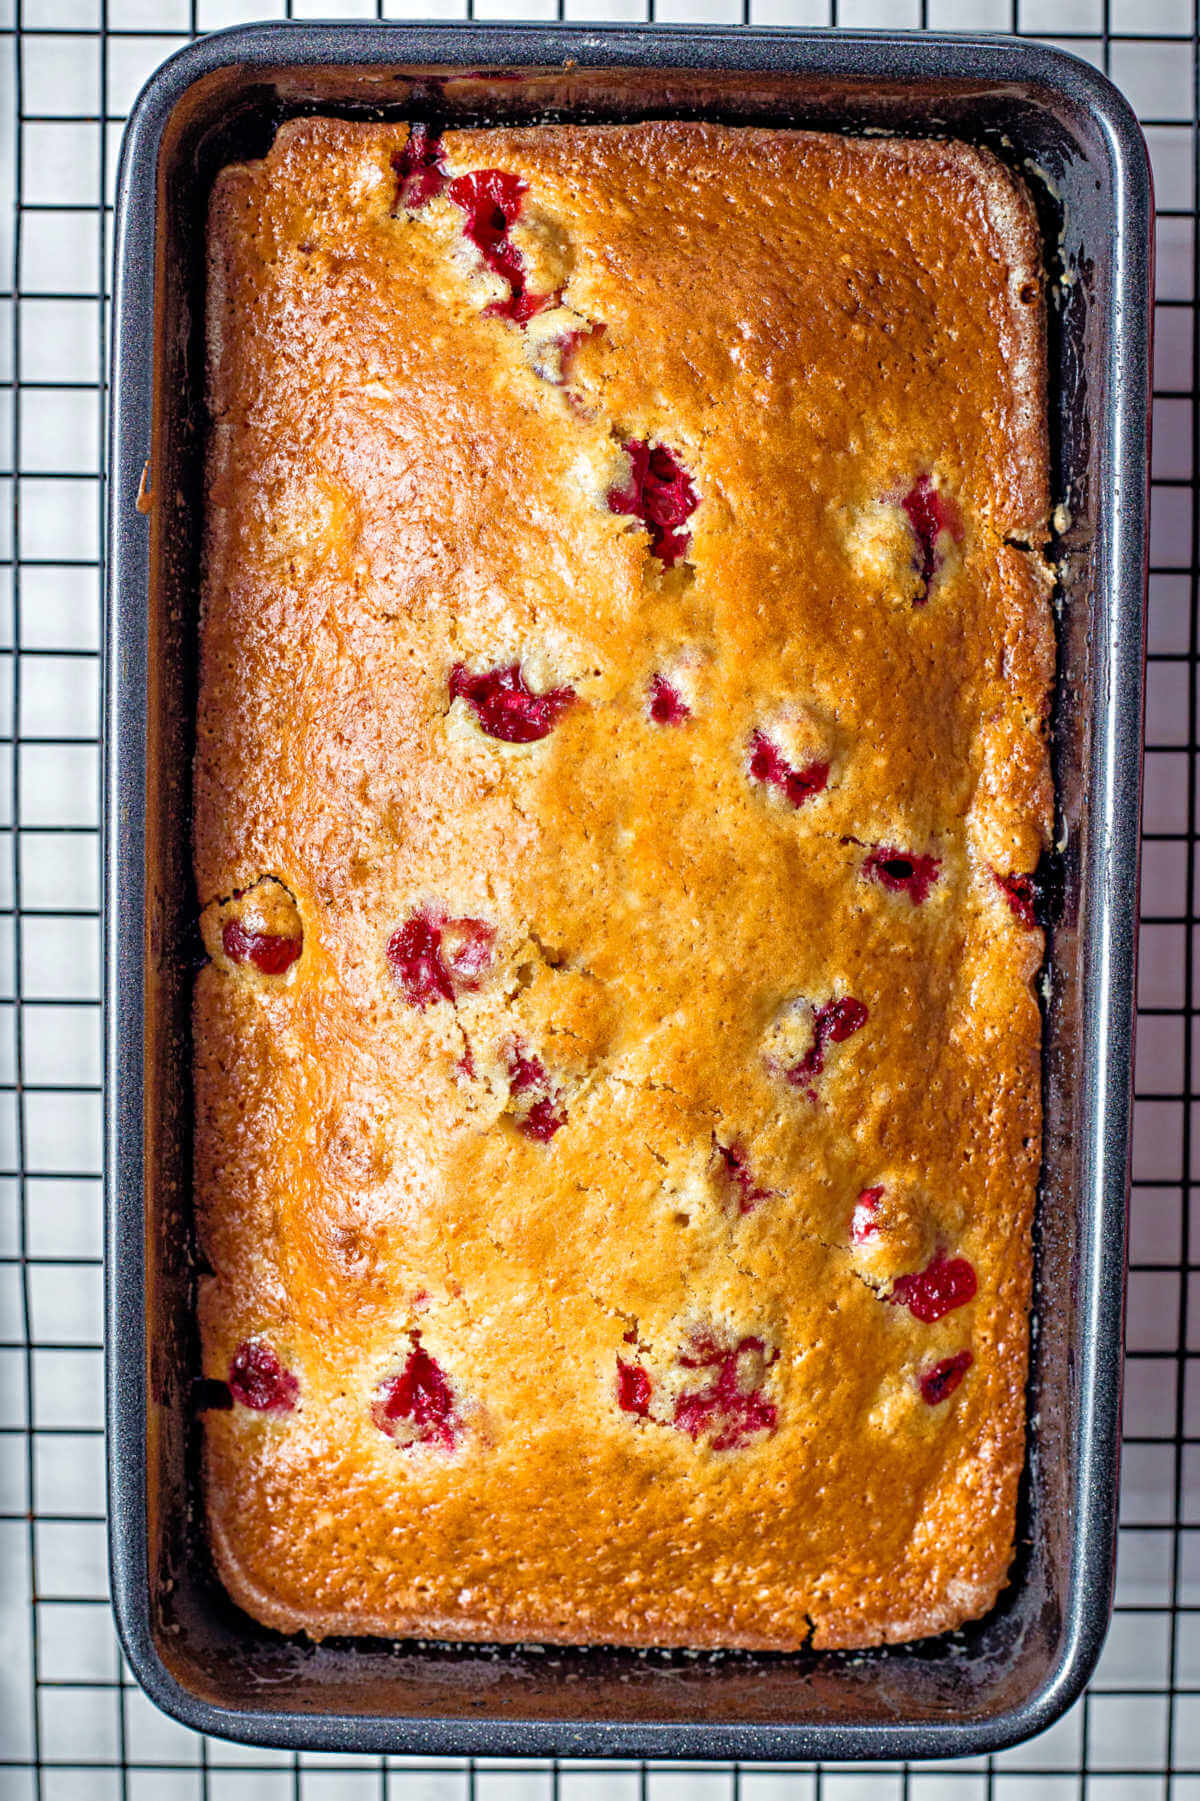 cranberry orange bread in a loaf pan on a wire rack.